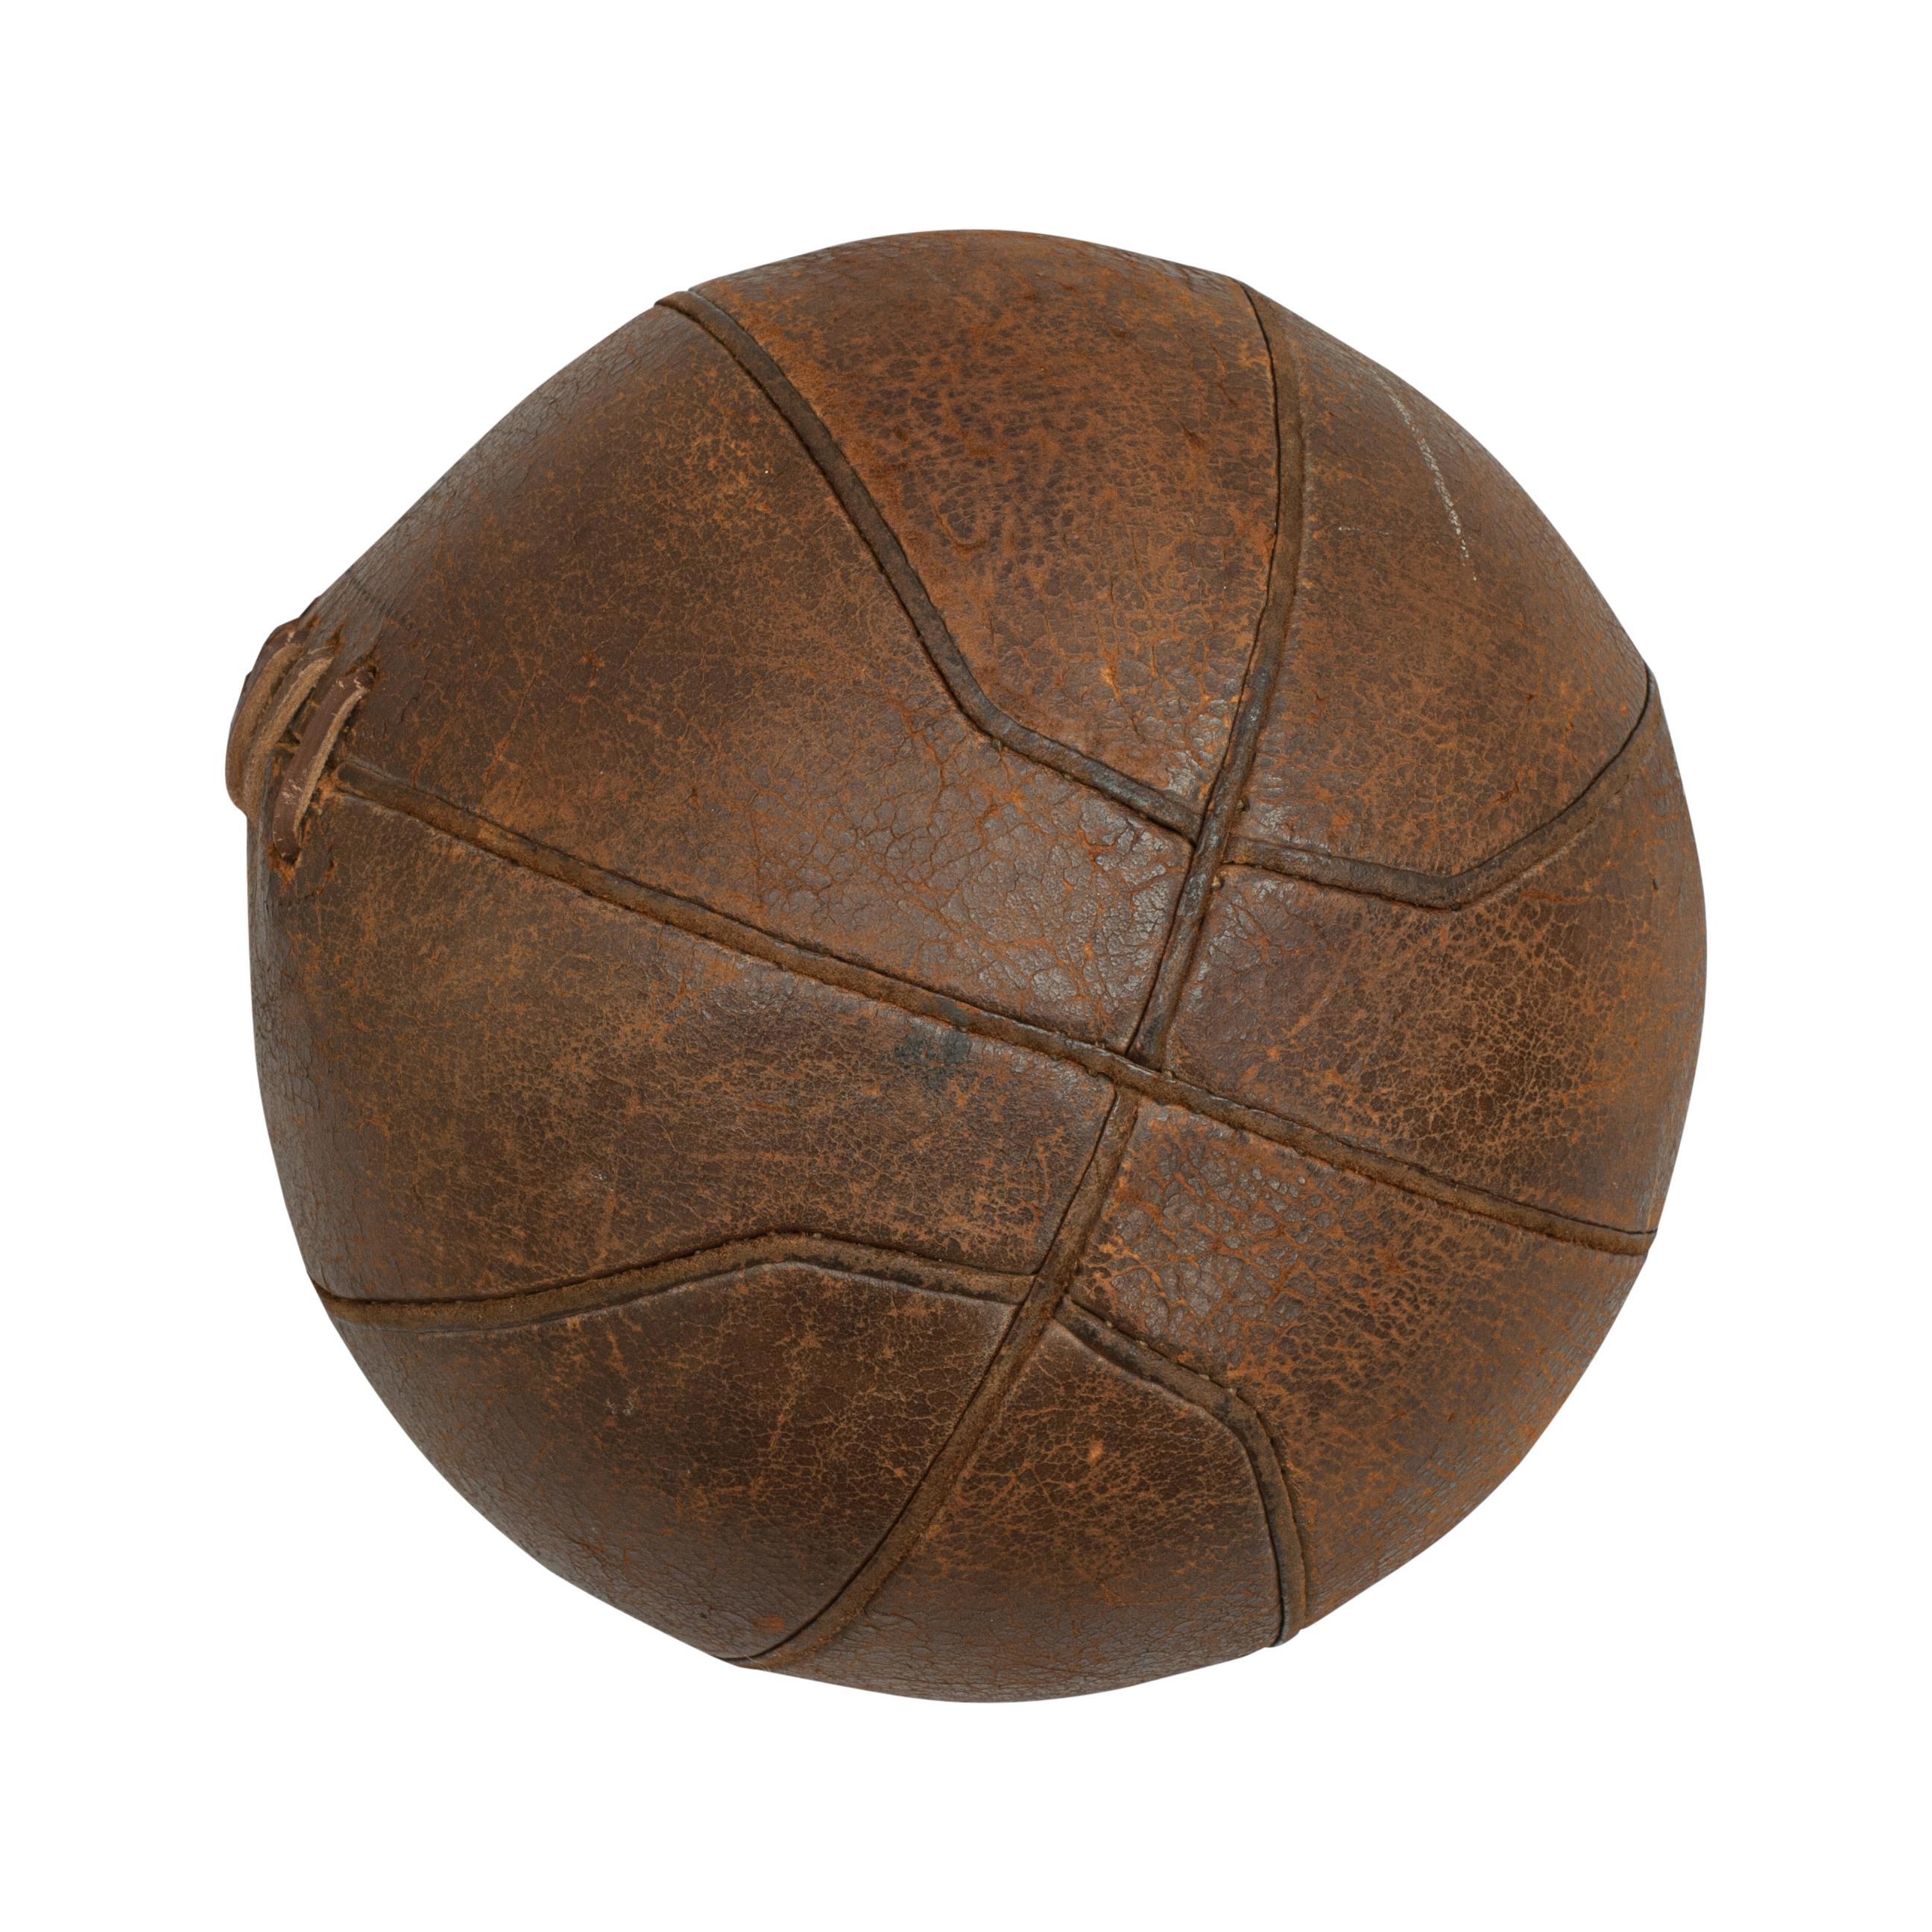 An original 19th century leather ball. The ball has an early 8-panel design with extra leather in the joints which is why we believe that this is early basketball or netball. A great ball in original condition. The ball has a 5 lace-up slit to the